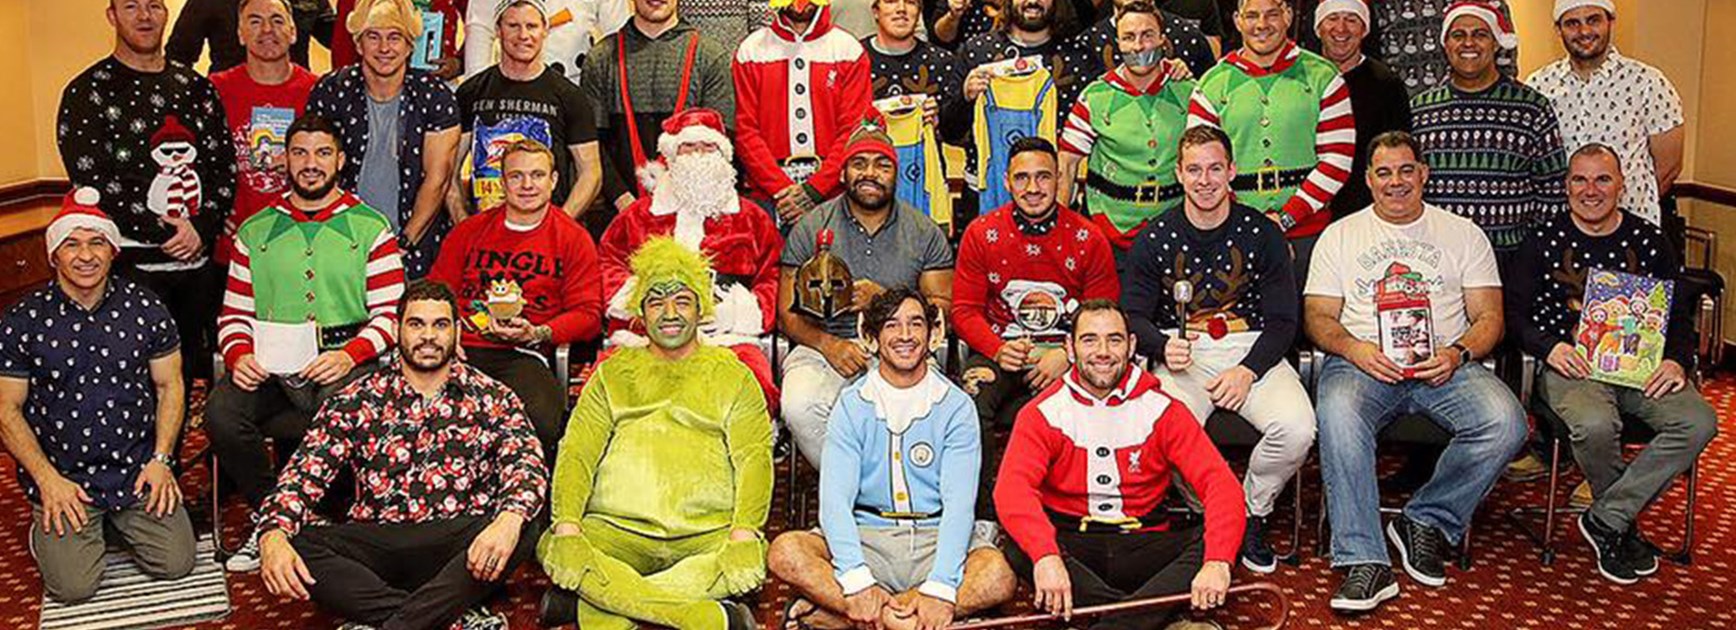 The Kangaroos had some fun with an early Christmas ahead of the Four Nations final.